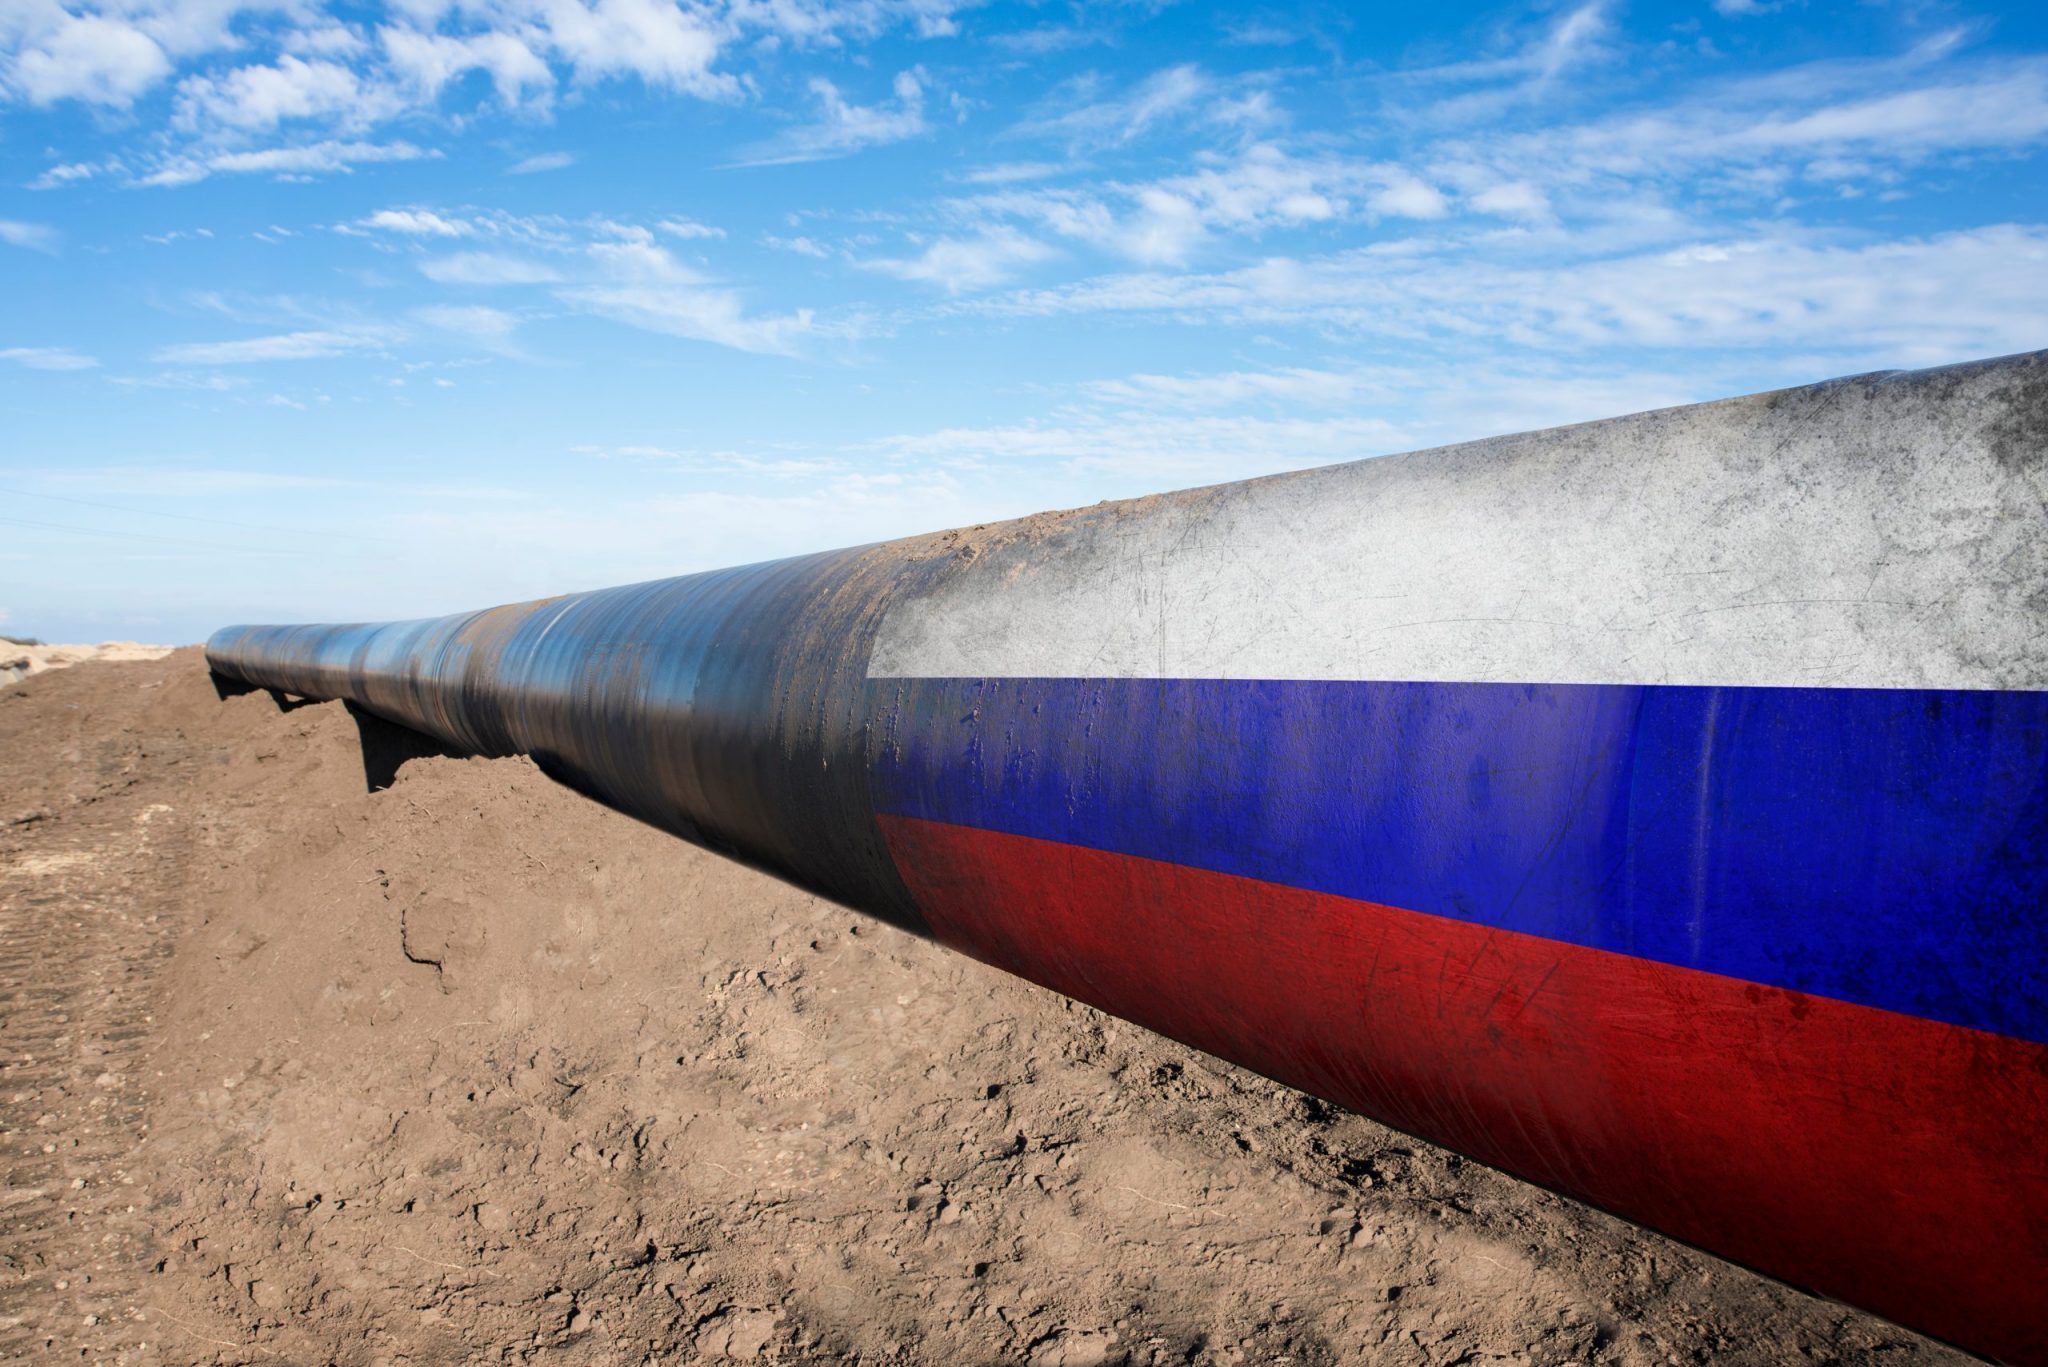 Gas pipeline with Russian flag. Concept of natural gas distribution through pipes with Russian flag on it.